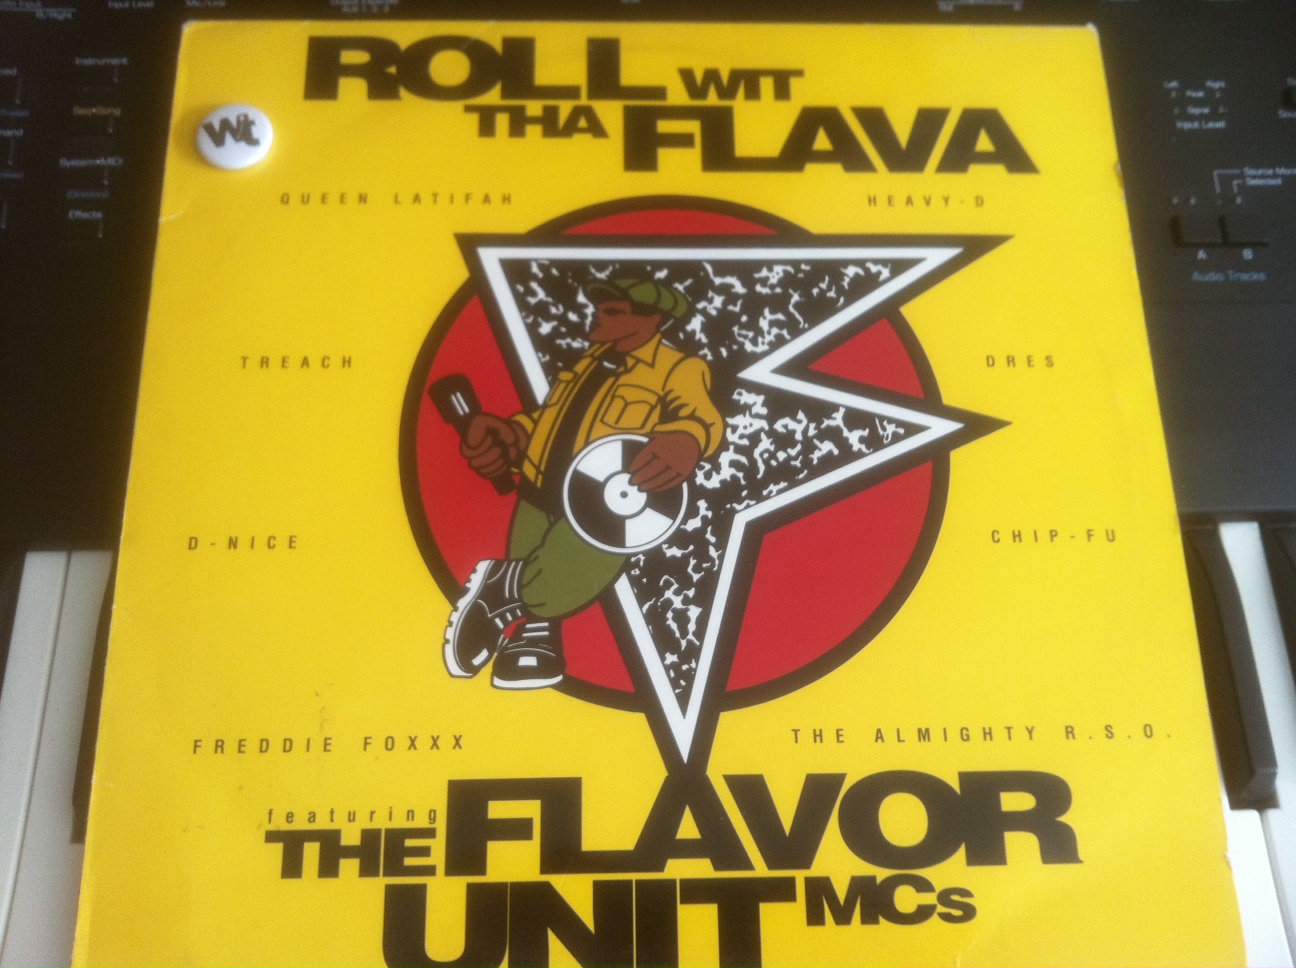 Daxistin Flavor Unit MC's - Roll With Tha Flava (Extended)